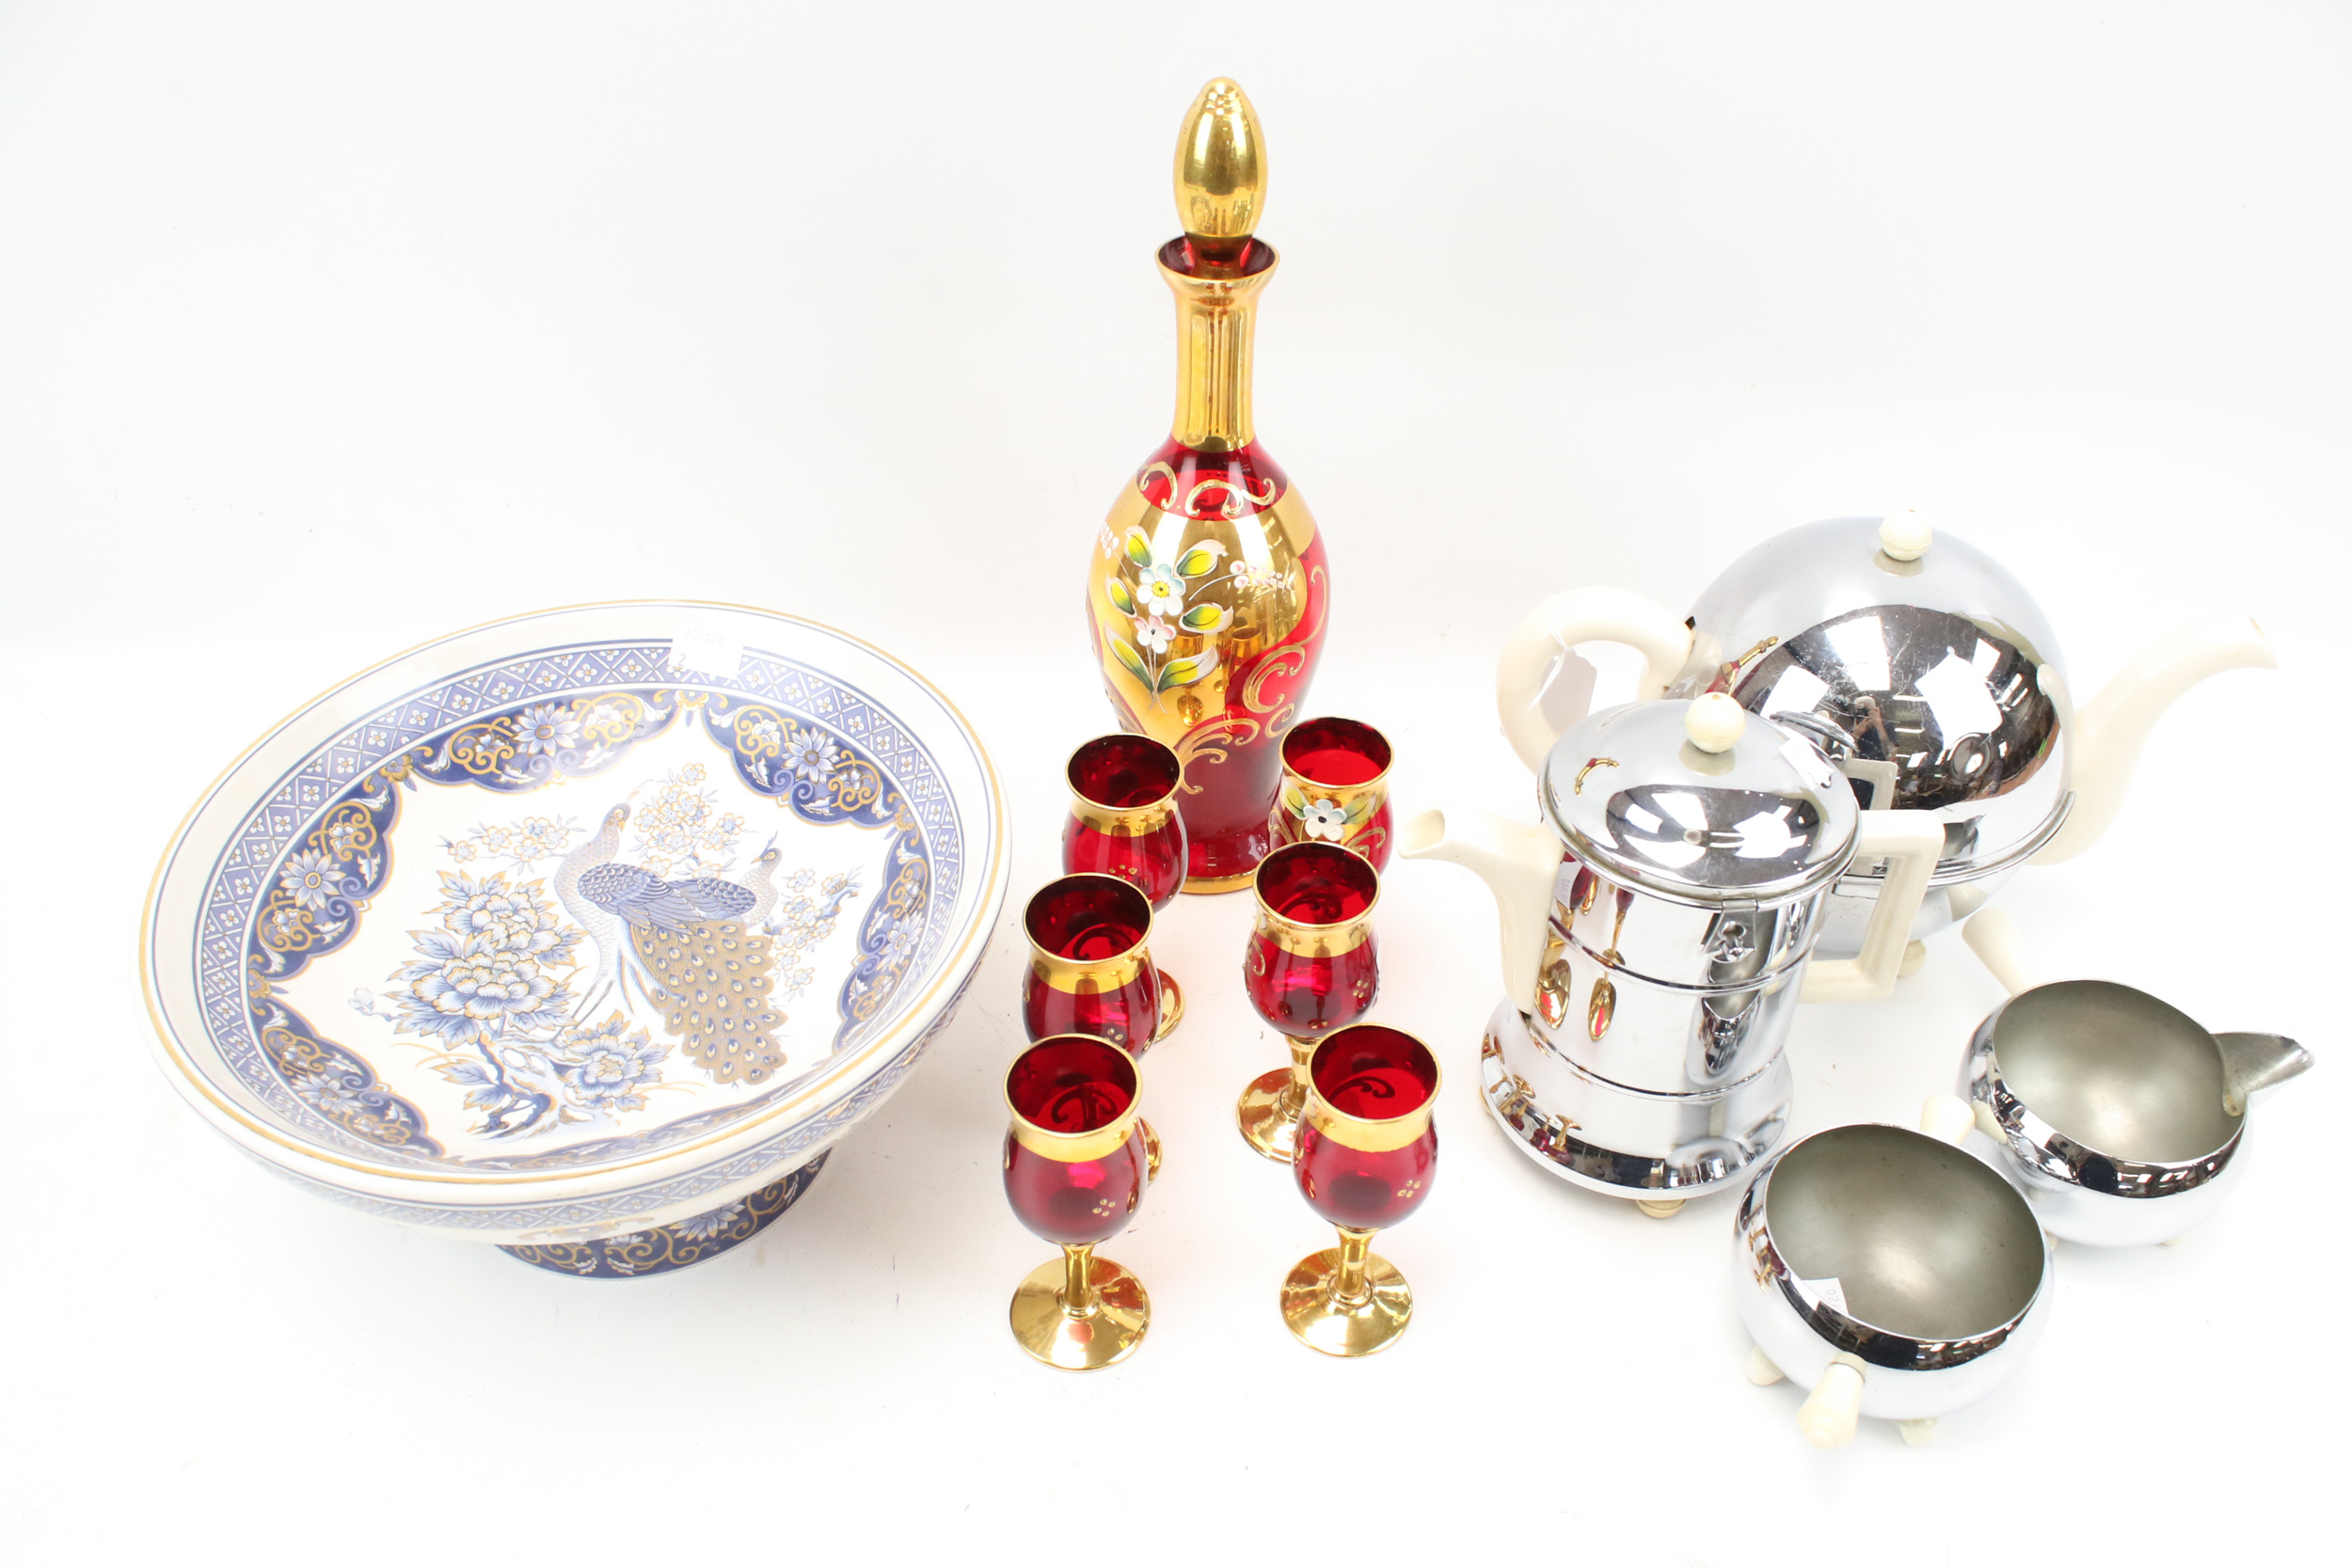 An assortment of 20th century and later ceramic, glass and metalware.